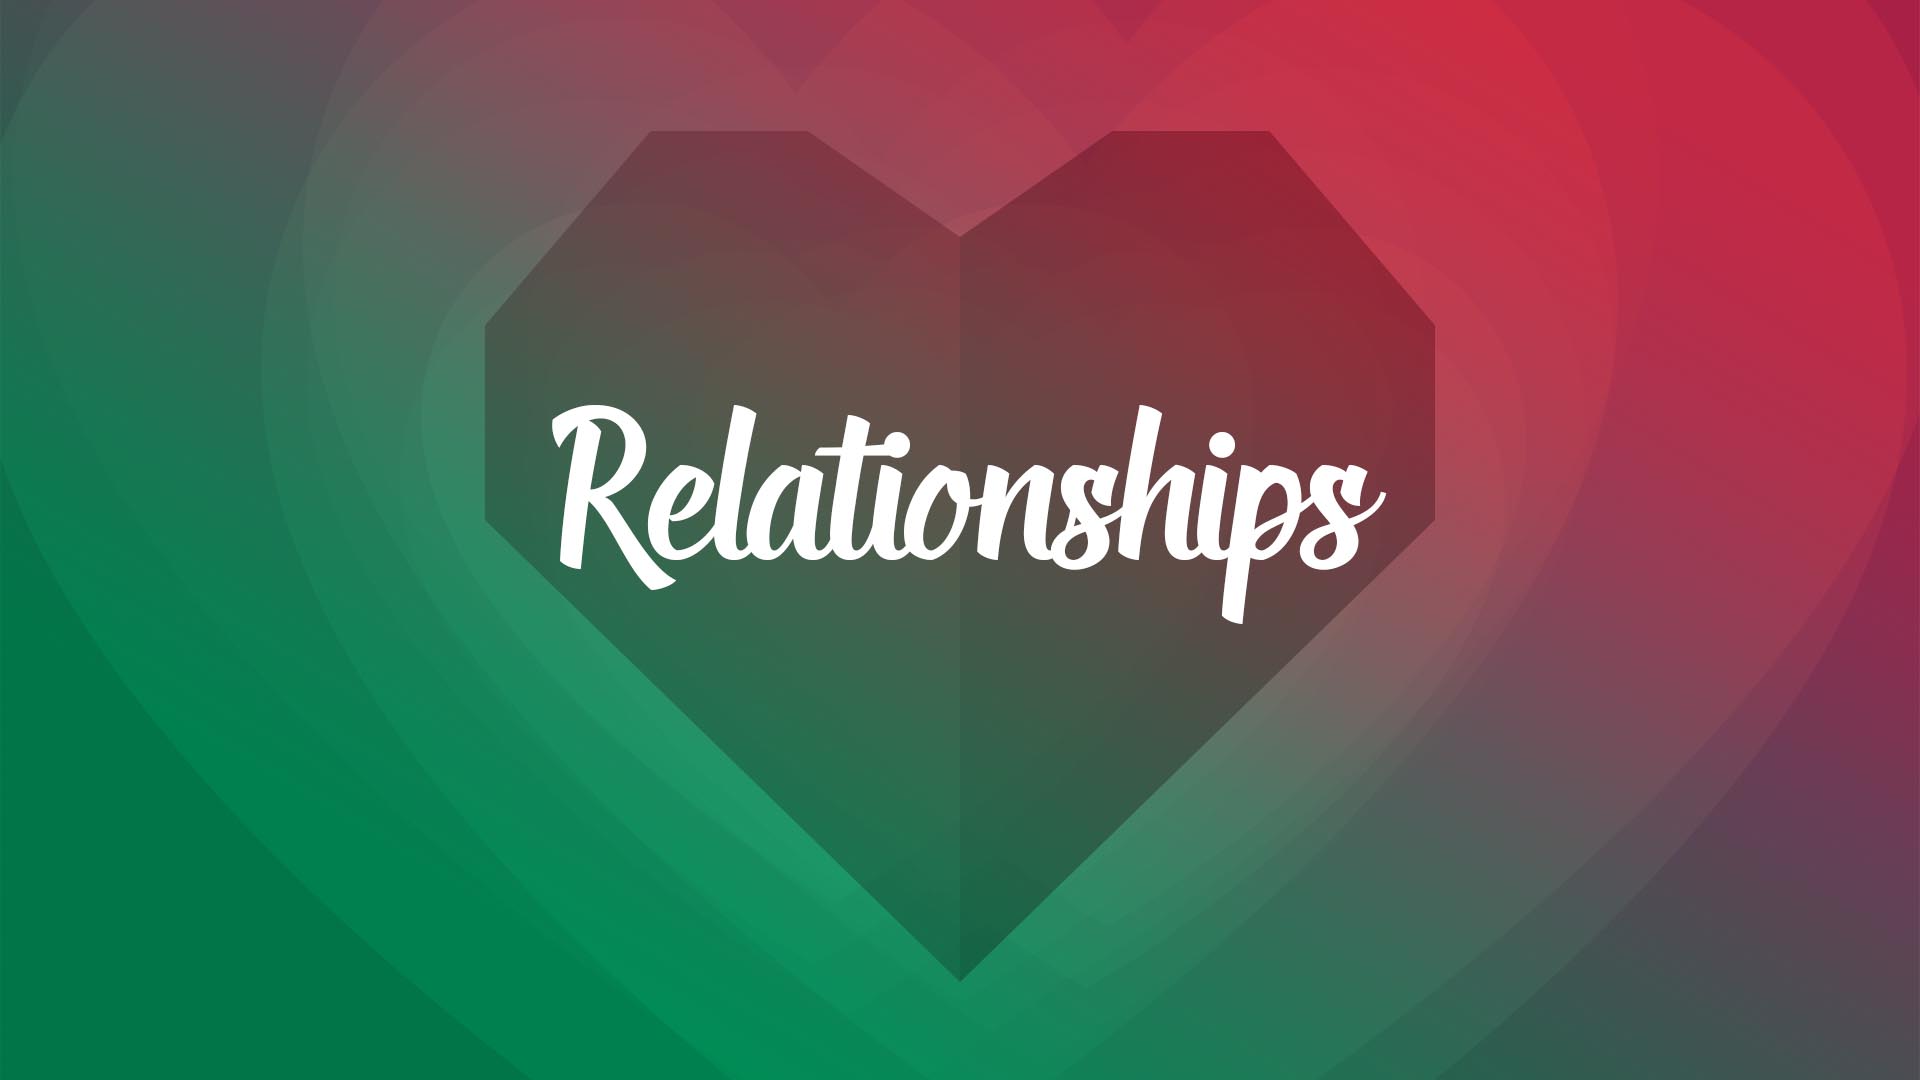 "Relationships" Message Series